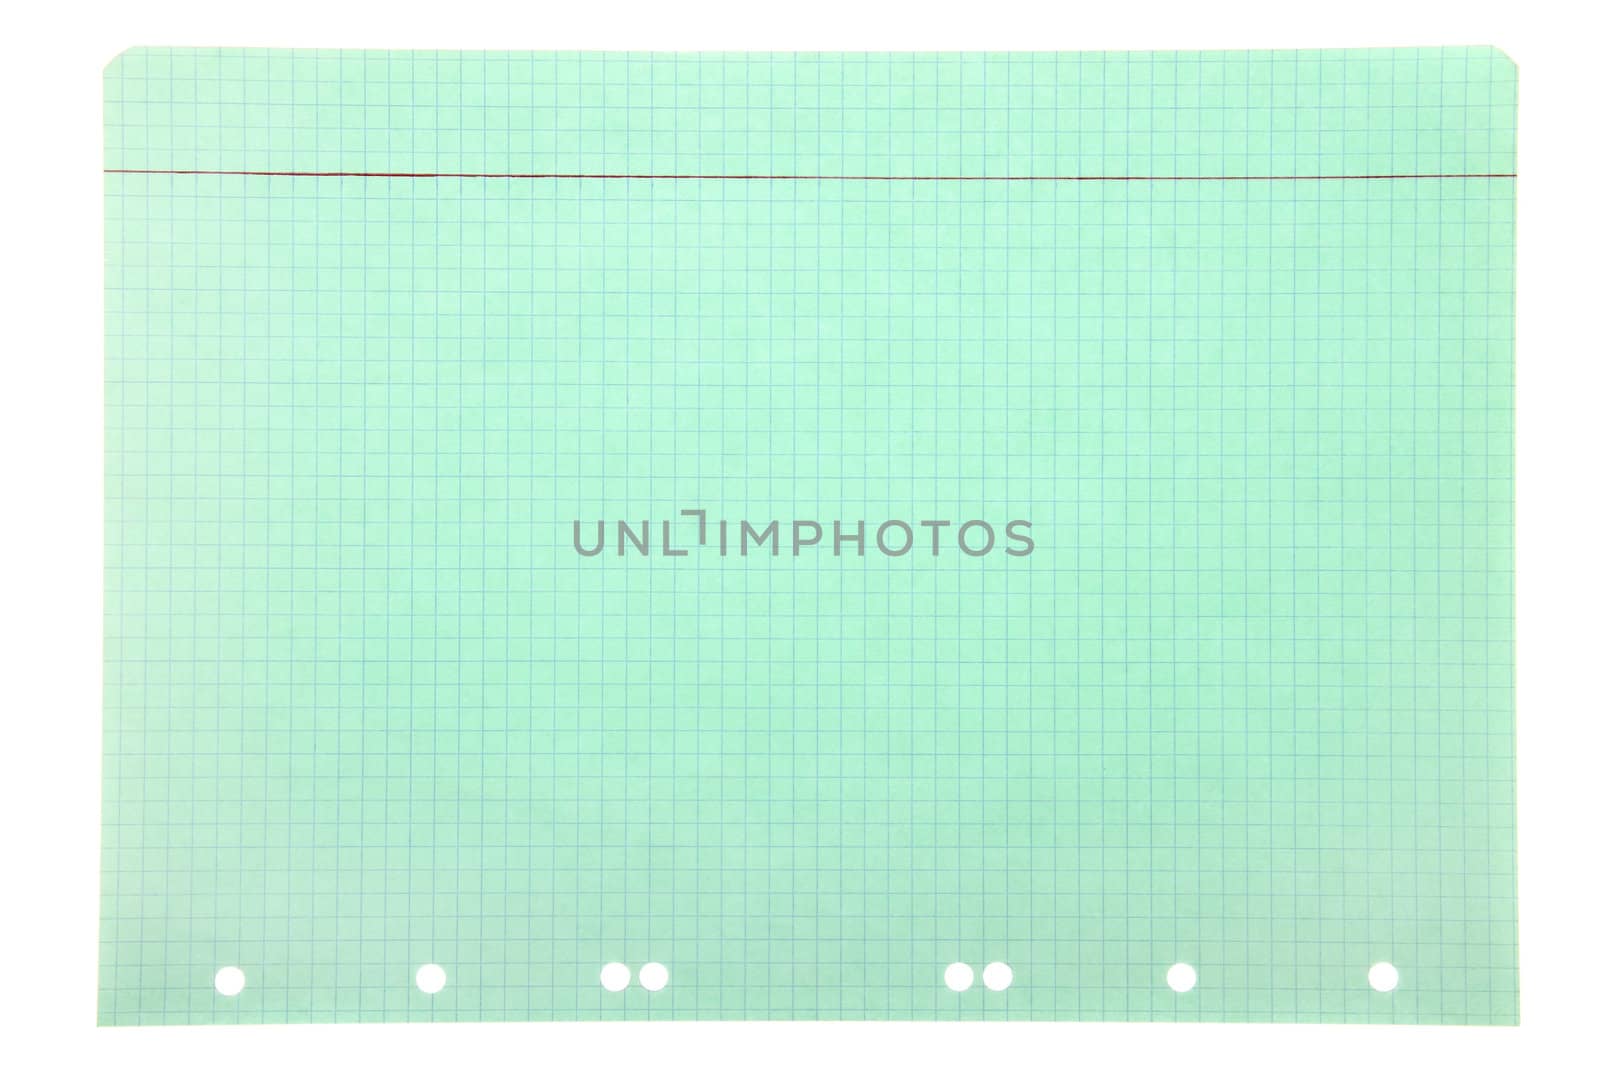 Blank squared notebook sheet, isolated on white